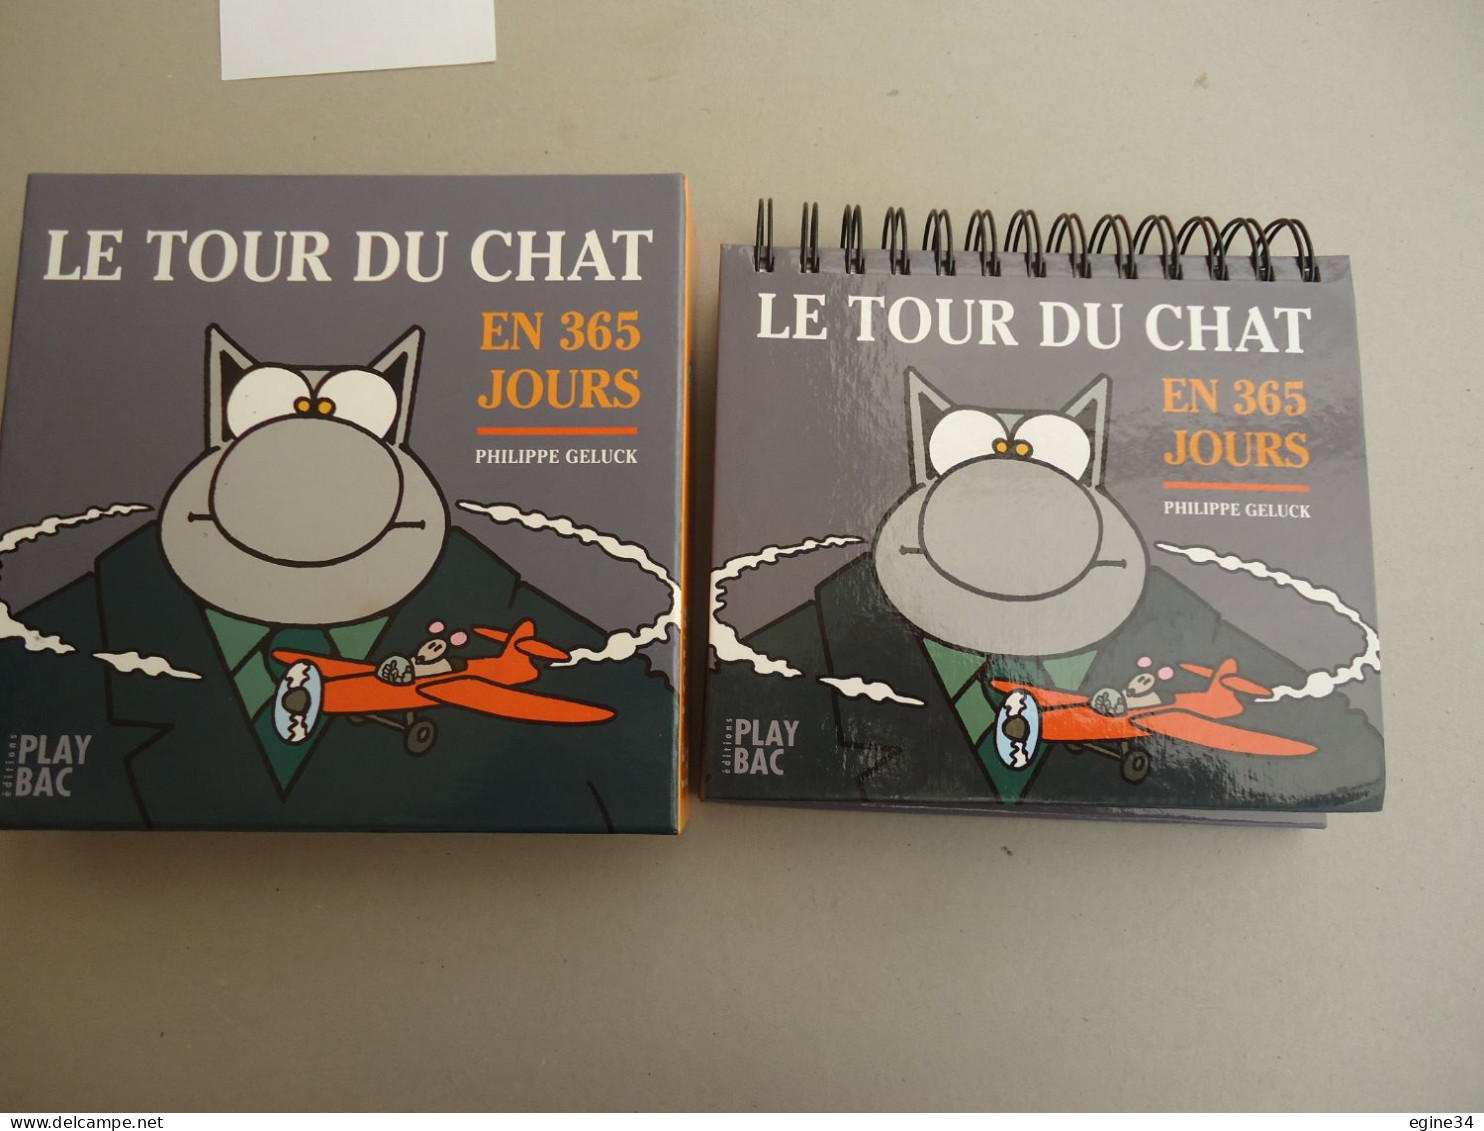 Editions Play Bac - Philippe Geluck - Le Tour Du Chat En 365 Jours - Calendrier Perpetuel -2006 - Geluck